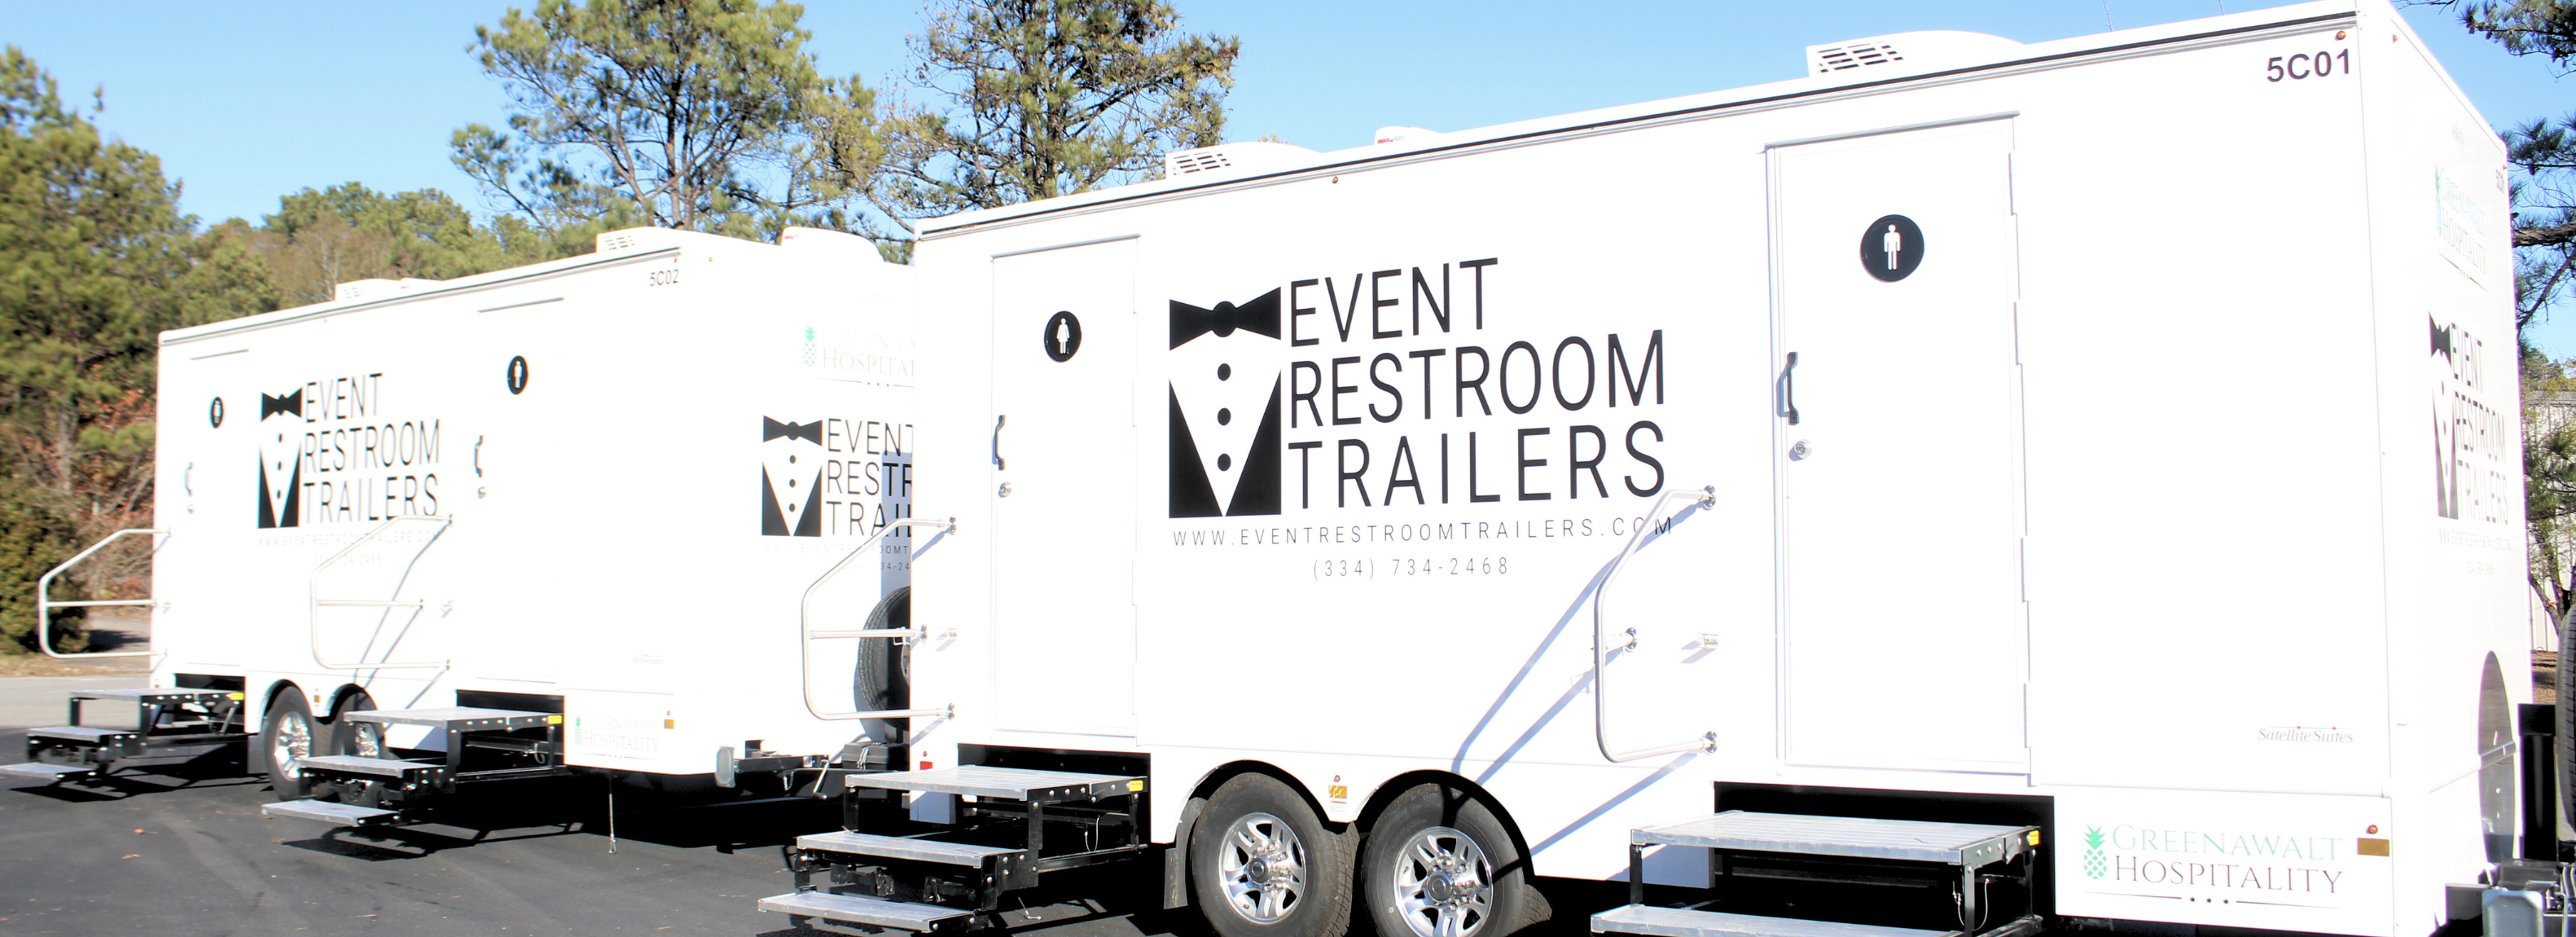 event restroom trailers luxury restrooms accessible air conditioned